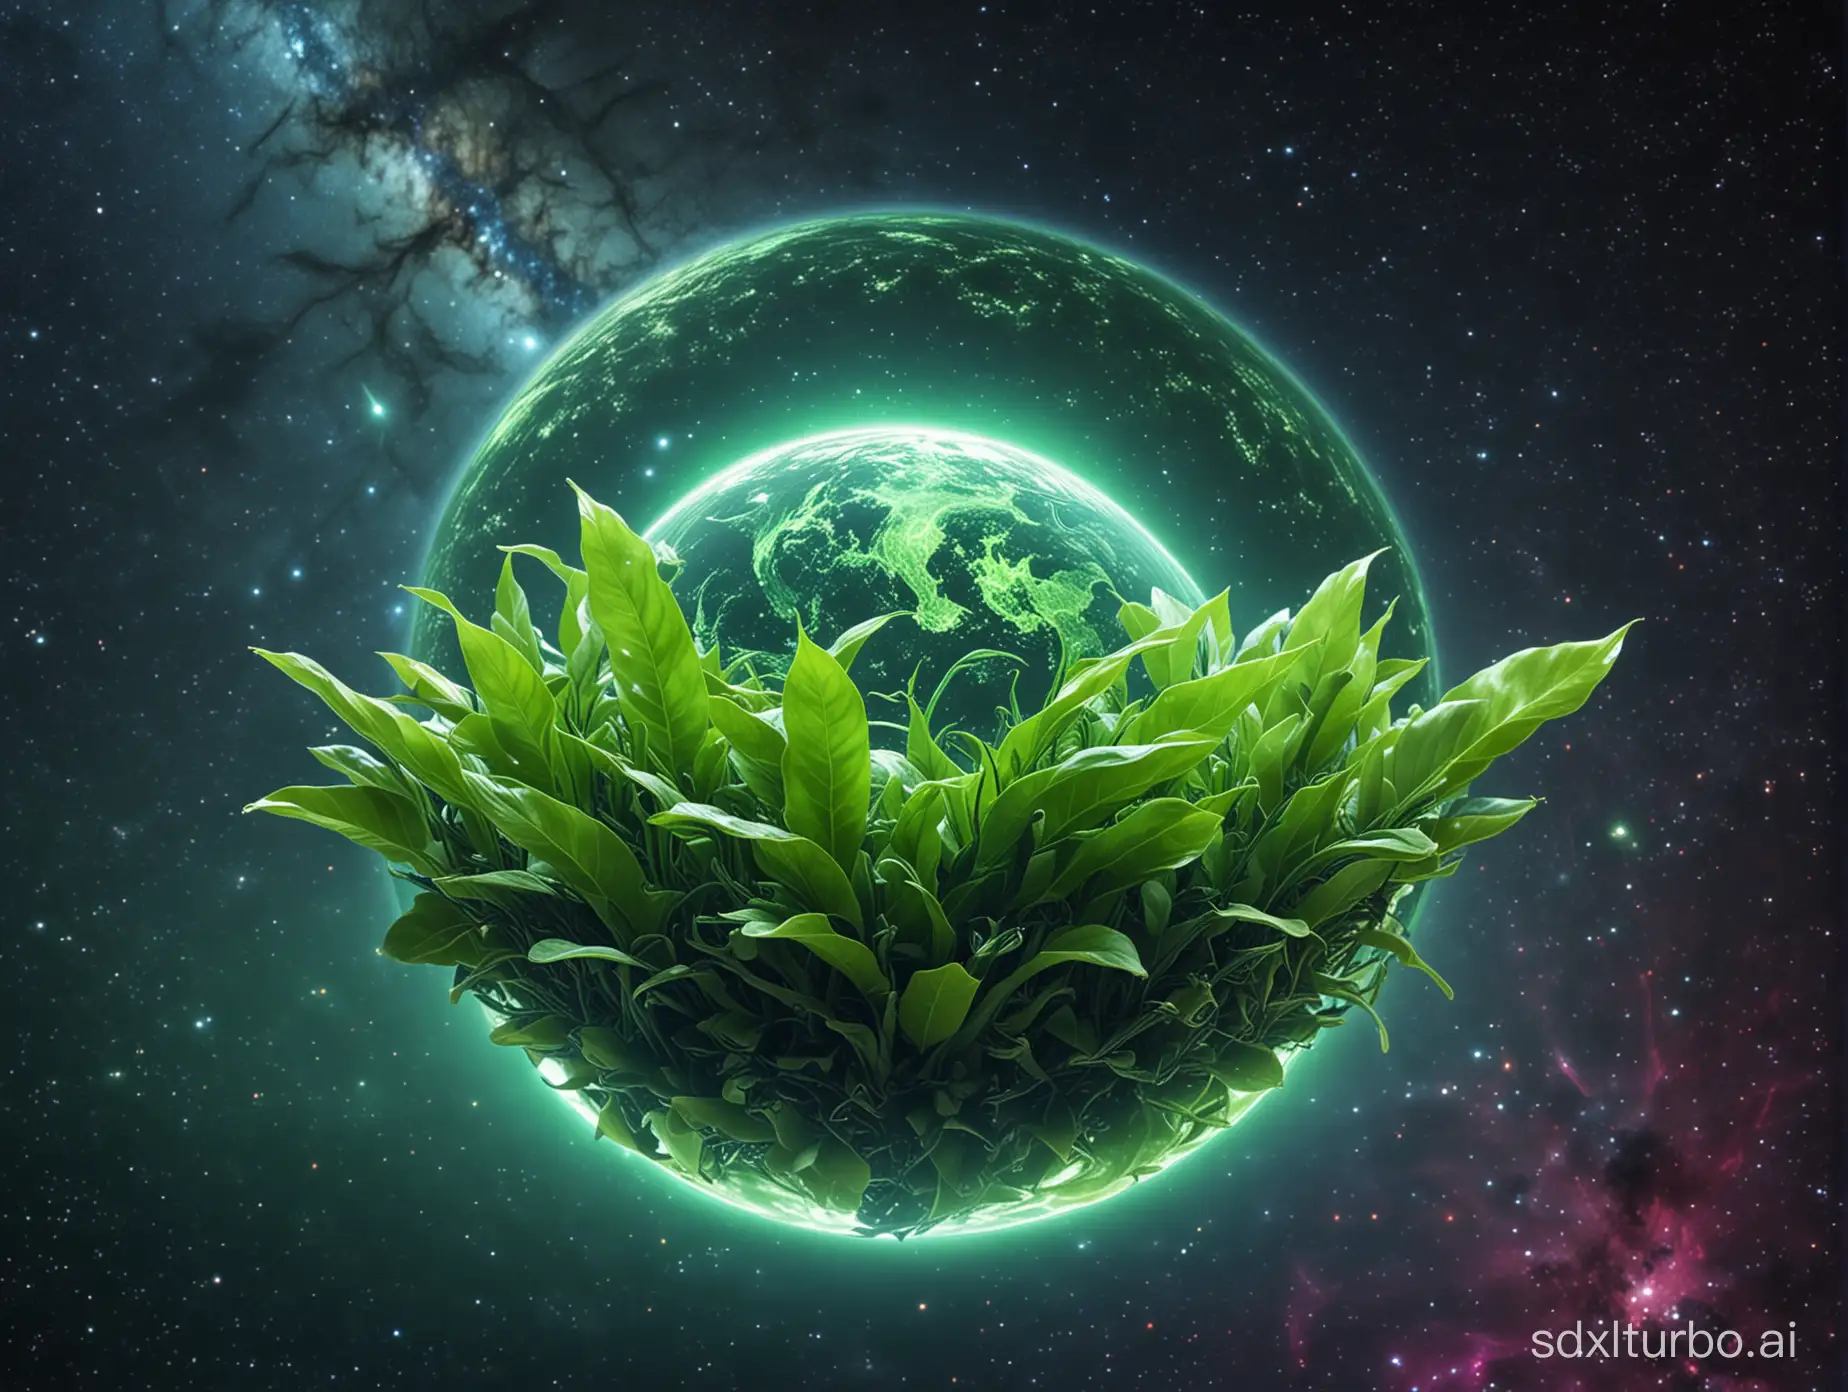 A fluorescent green tea leaf planet in a universe.